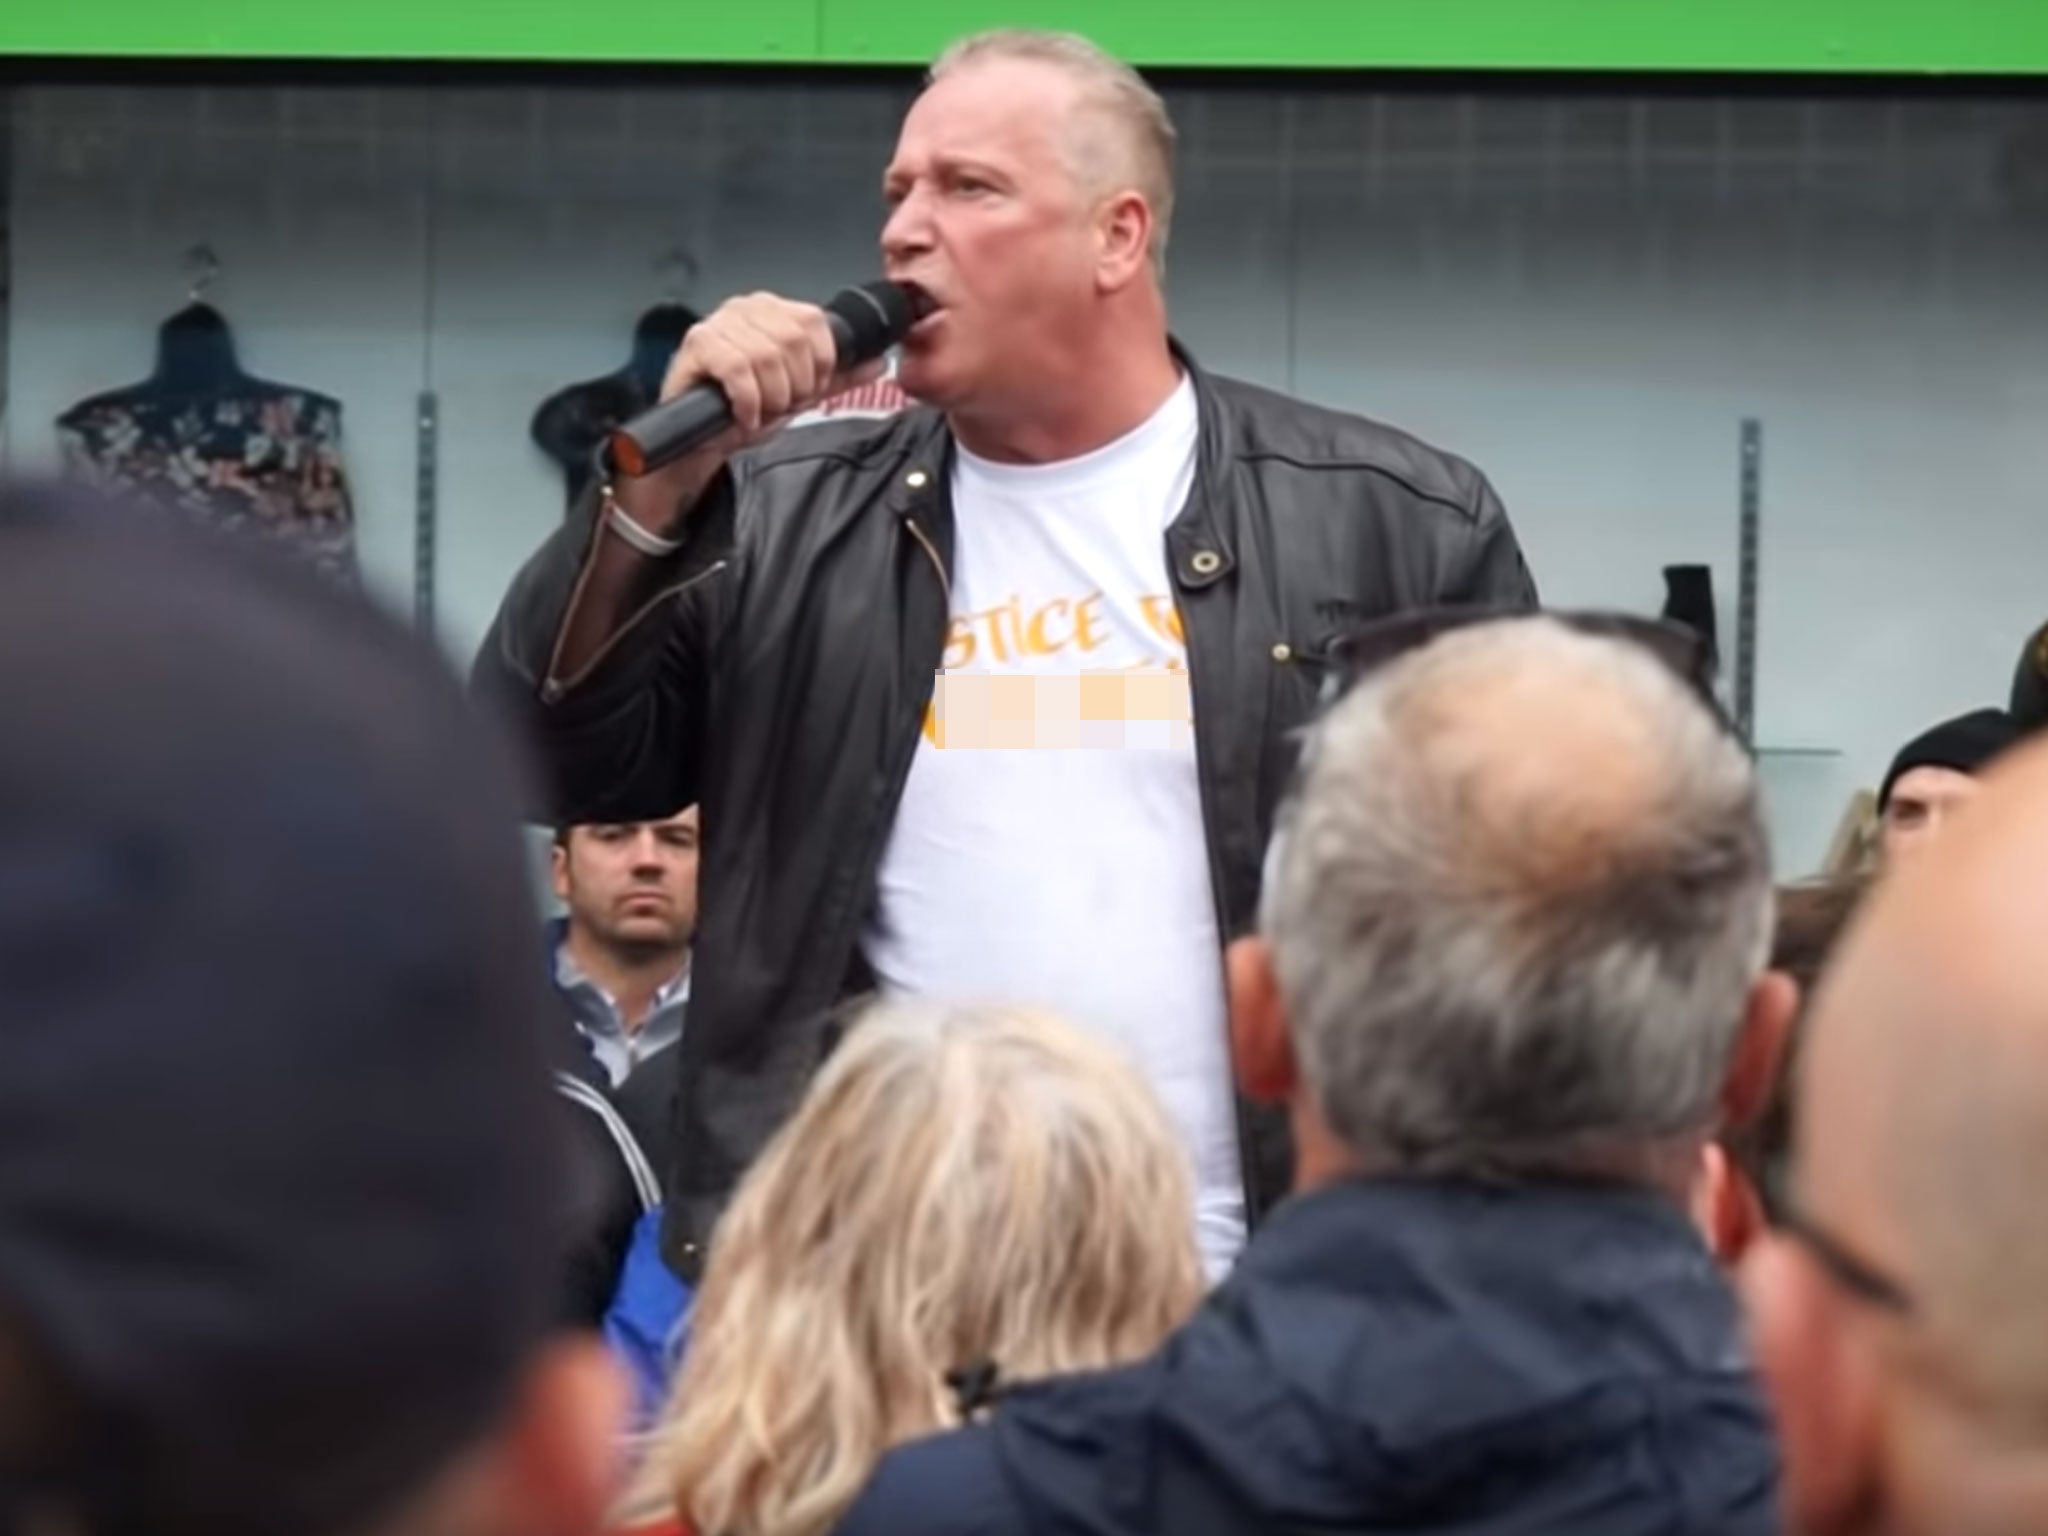 Billy Charlton speaking at a rally in Sunderland in June 2017